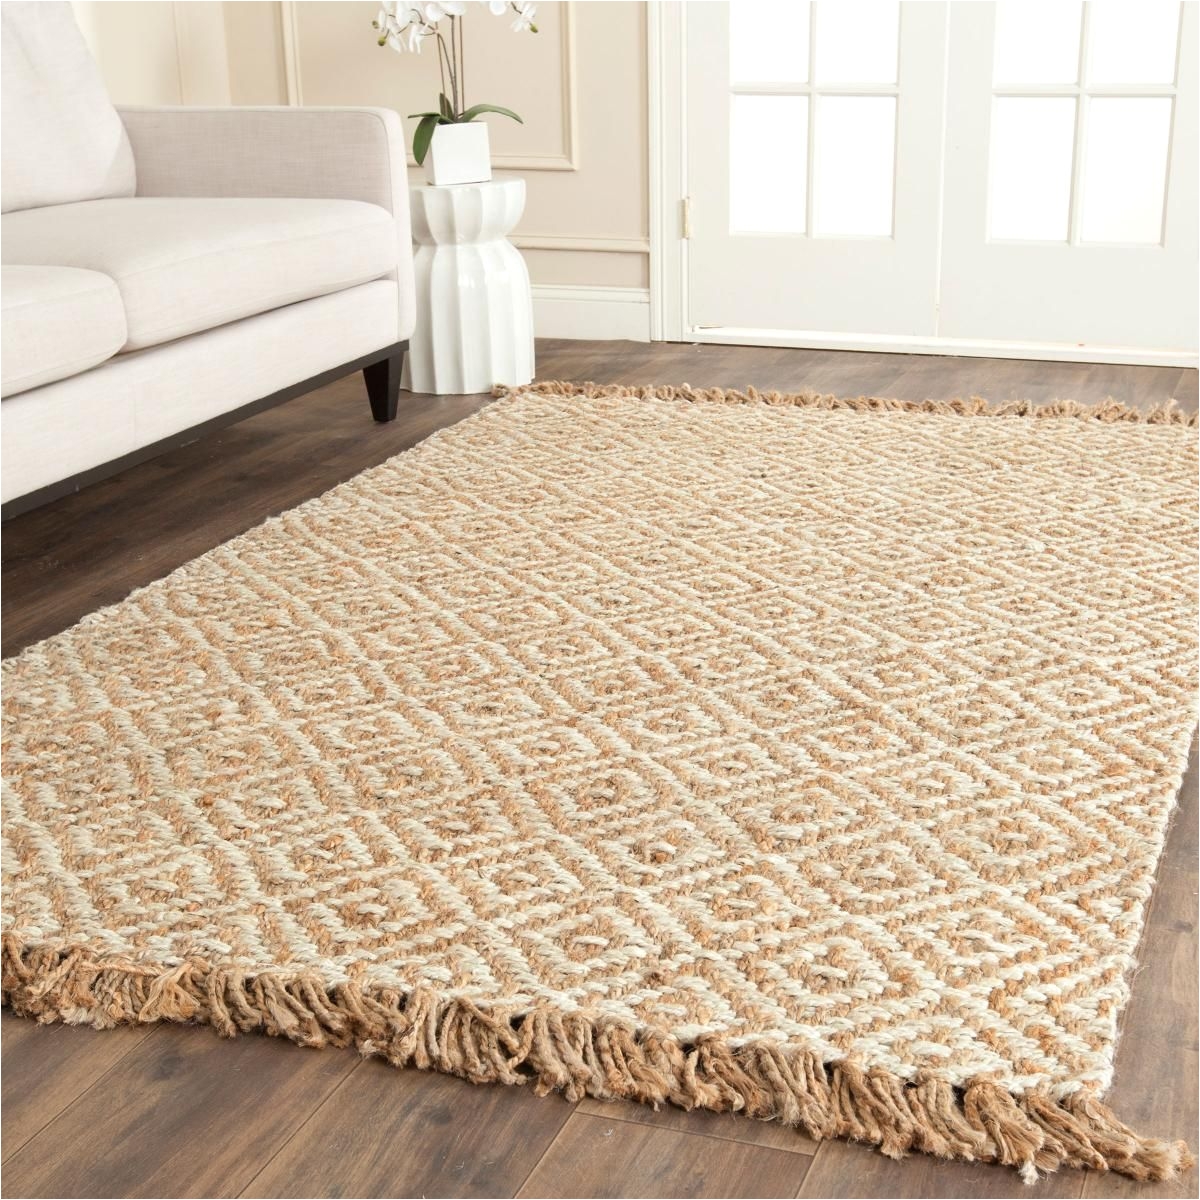 Cheap Sisal Rugs 8×10 Rug Nf450a Natural Fiber area Rugs by Rustic Rugs Natural and Sisal